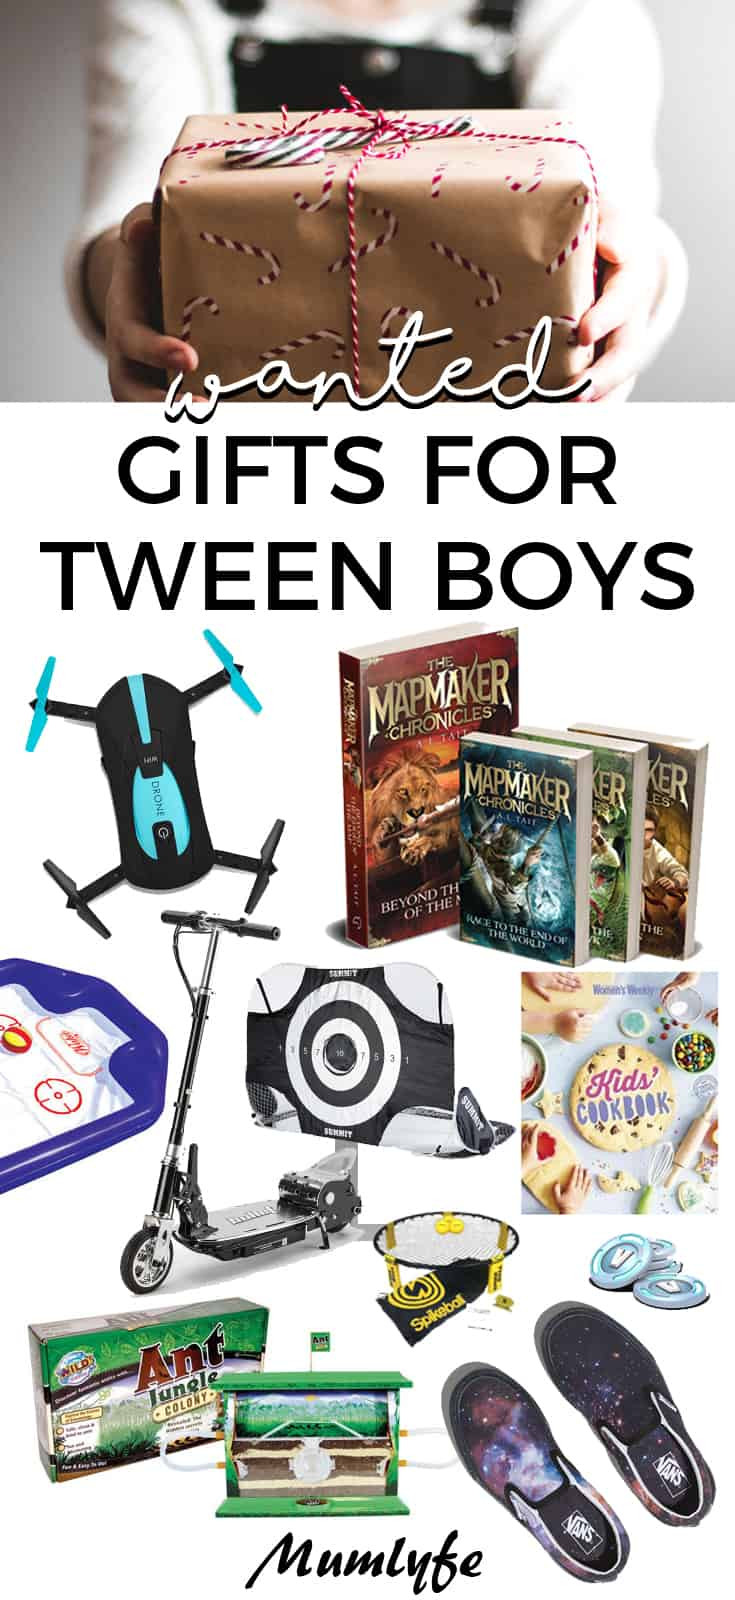 Gift Ideas For Tween Boys
 21 t ideas for tween boys they will really love